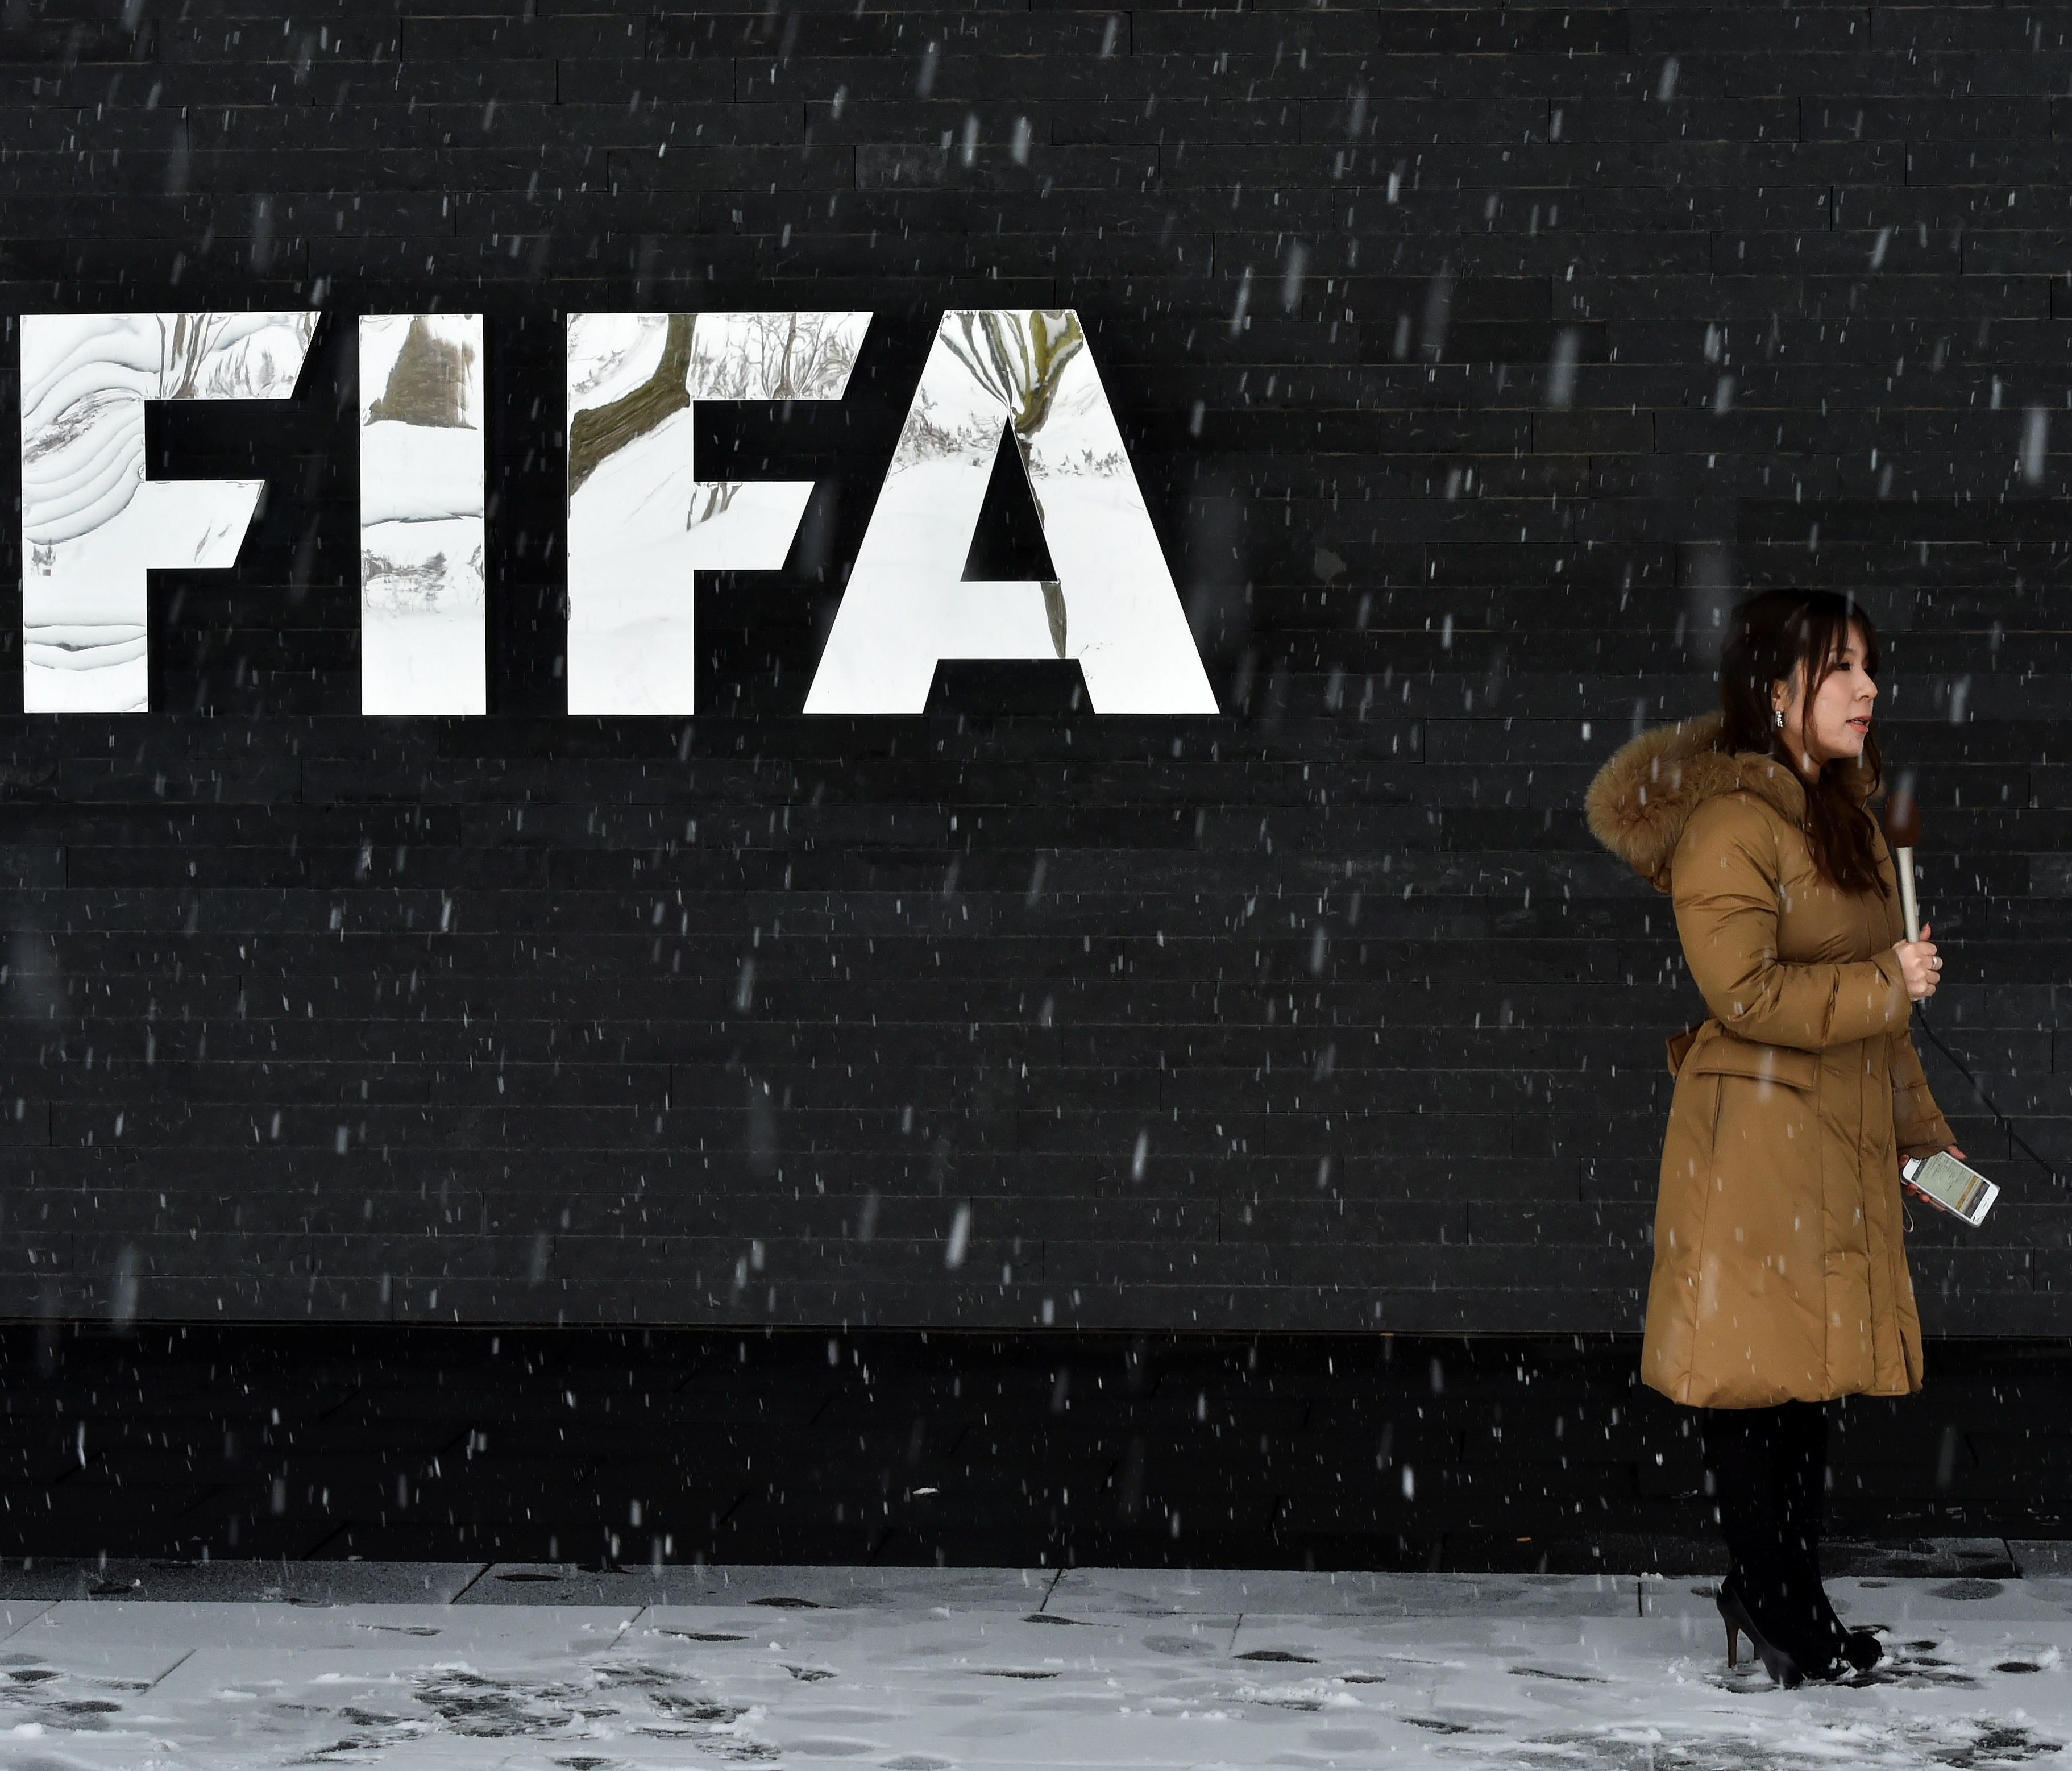 FIFA continues to operate in the shadows despite efforts to reform the governing body.